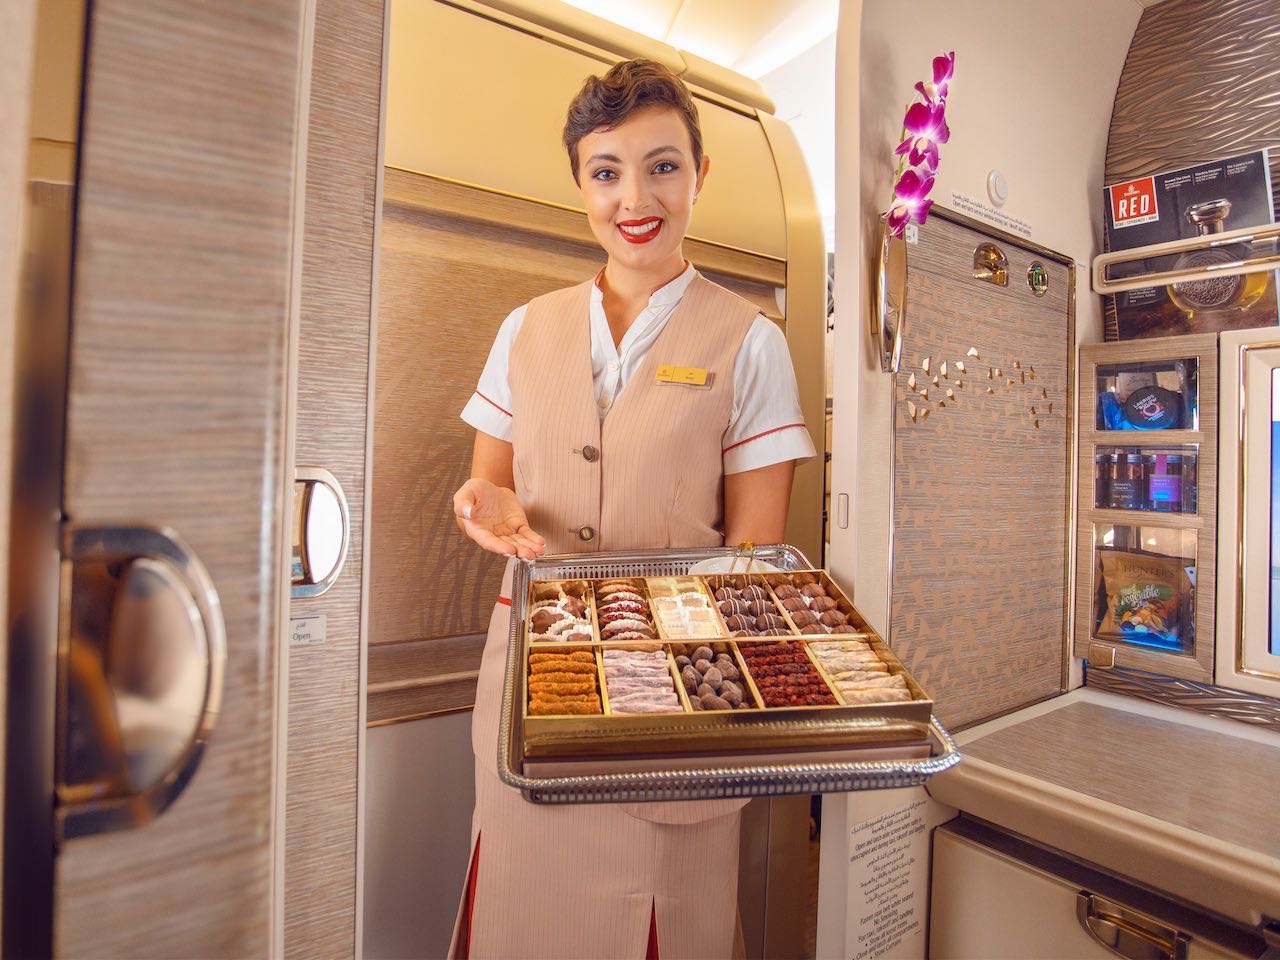 Emirates is investing over US$2 billion to enhance its inflight customer experience, including a massive programme to retrofit over 120 aircraft with the latest interiors, plus an array of other service improvements across all cabins starting in 2022.

.
.
.
#businesstravel #businesstraveler #biztravel #worktrip #businessclass #aviation #avgeek #frequentflyer #businesstrip #biztrip #roadwarrior #instagramaviation #businesstraveller # #turningleft #windowseat  #takeoff #travel #traveltime #traveler #traveller #businesstravelnews #corporatetraveller #corporatetraveler #travelforwork #upgrade #firstclass #flyingprivate